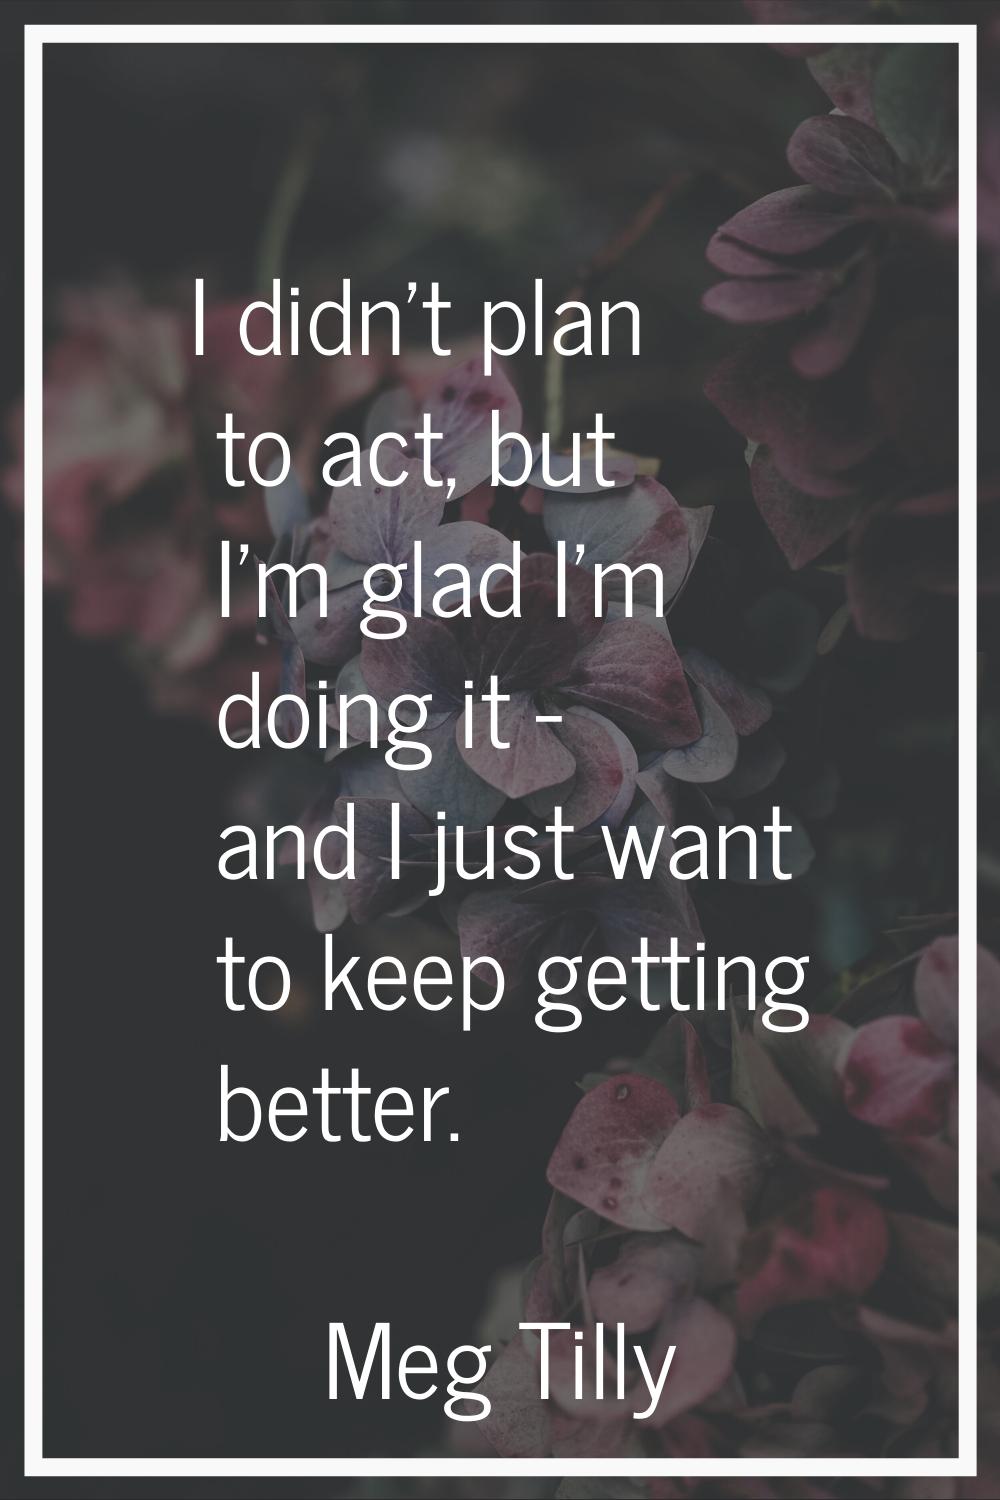 I didn't plan to act, but I'm glad I'm doing it - and I just want to keep getting better.